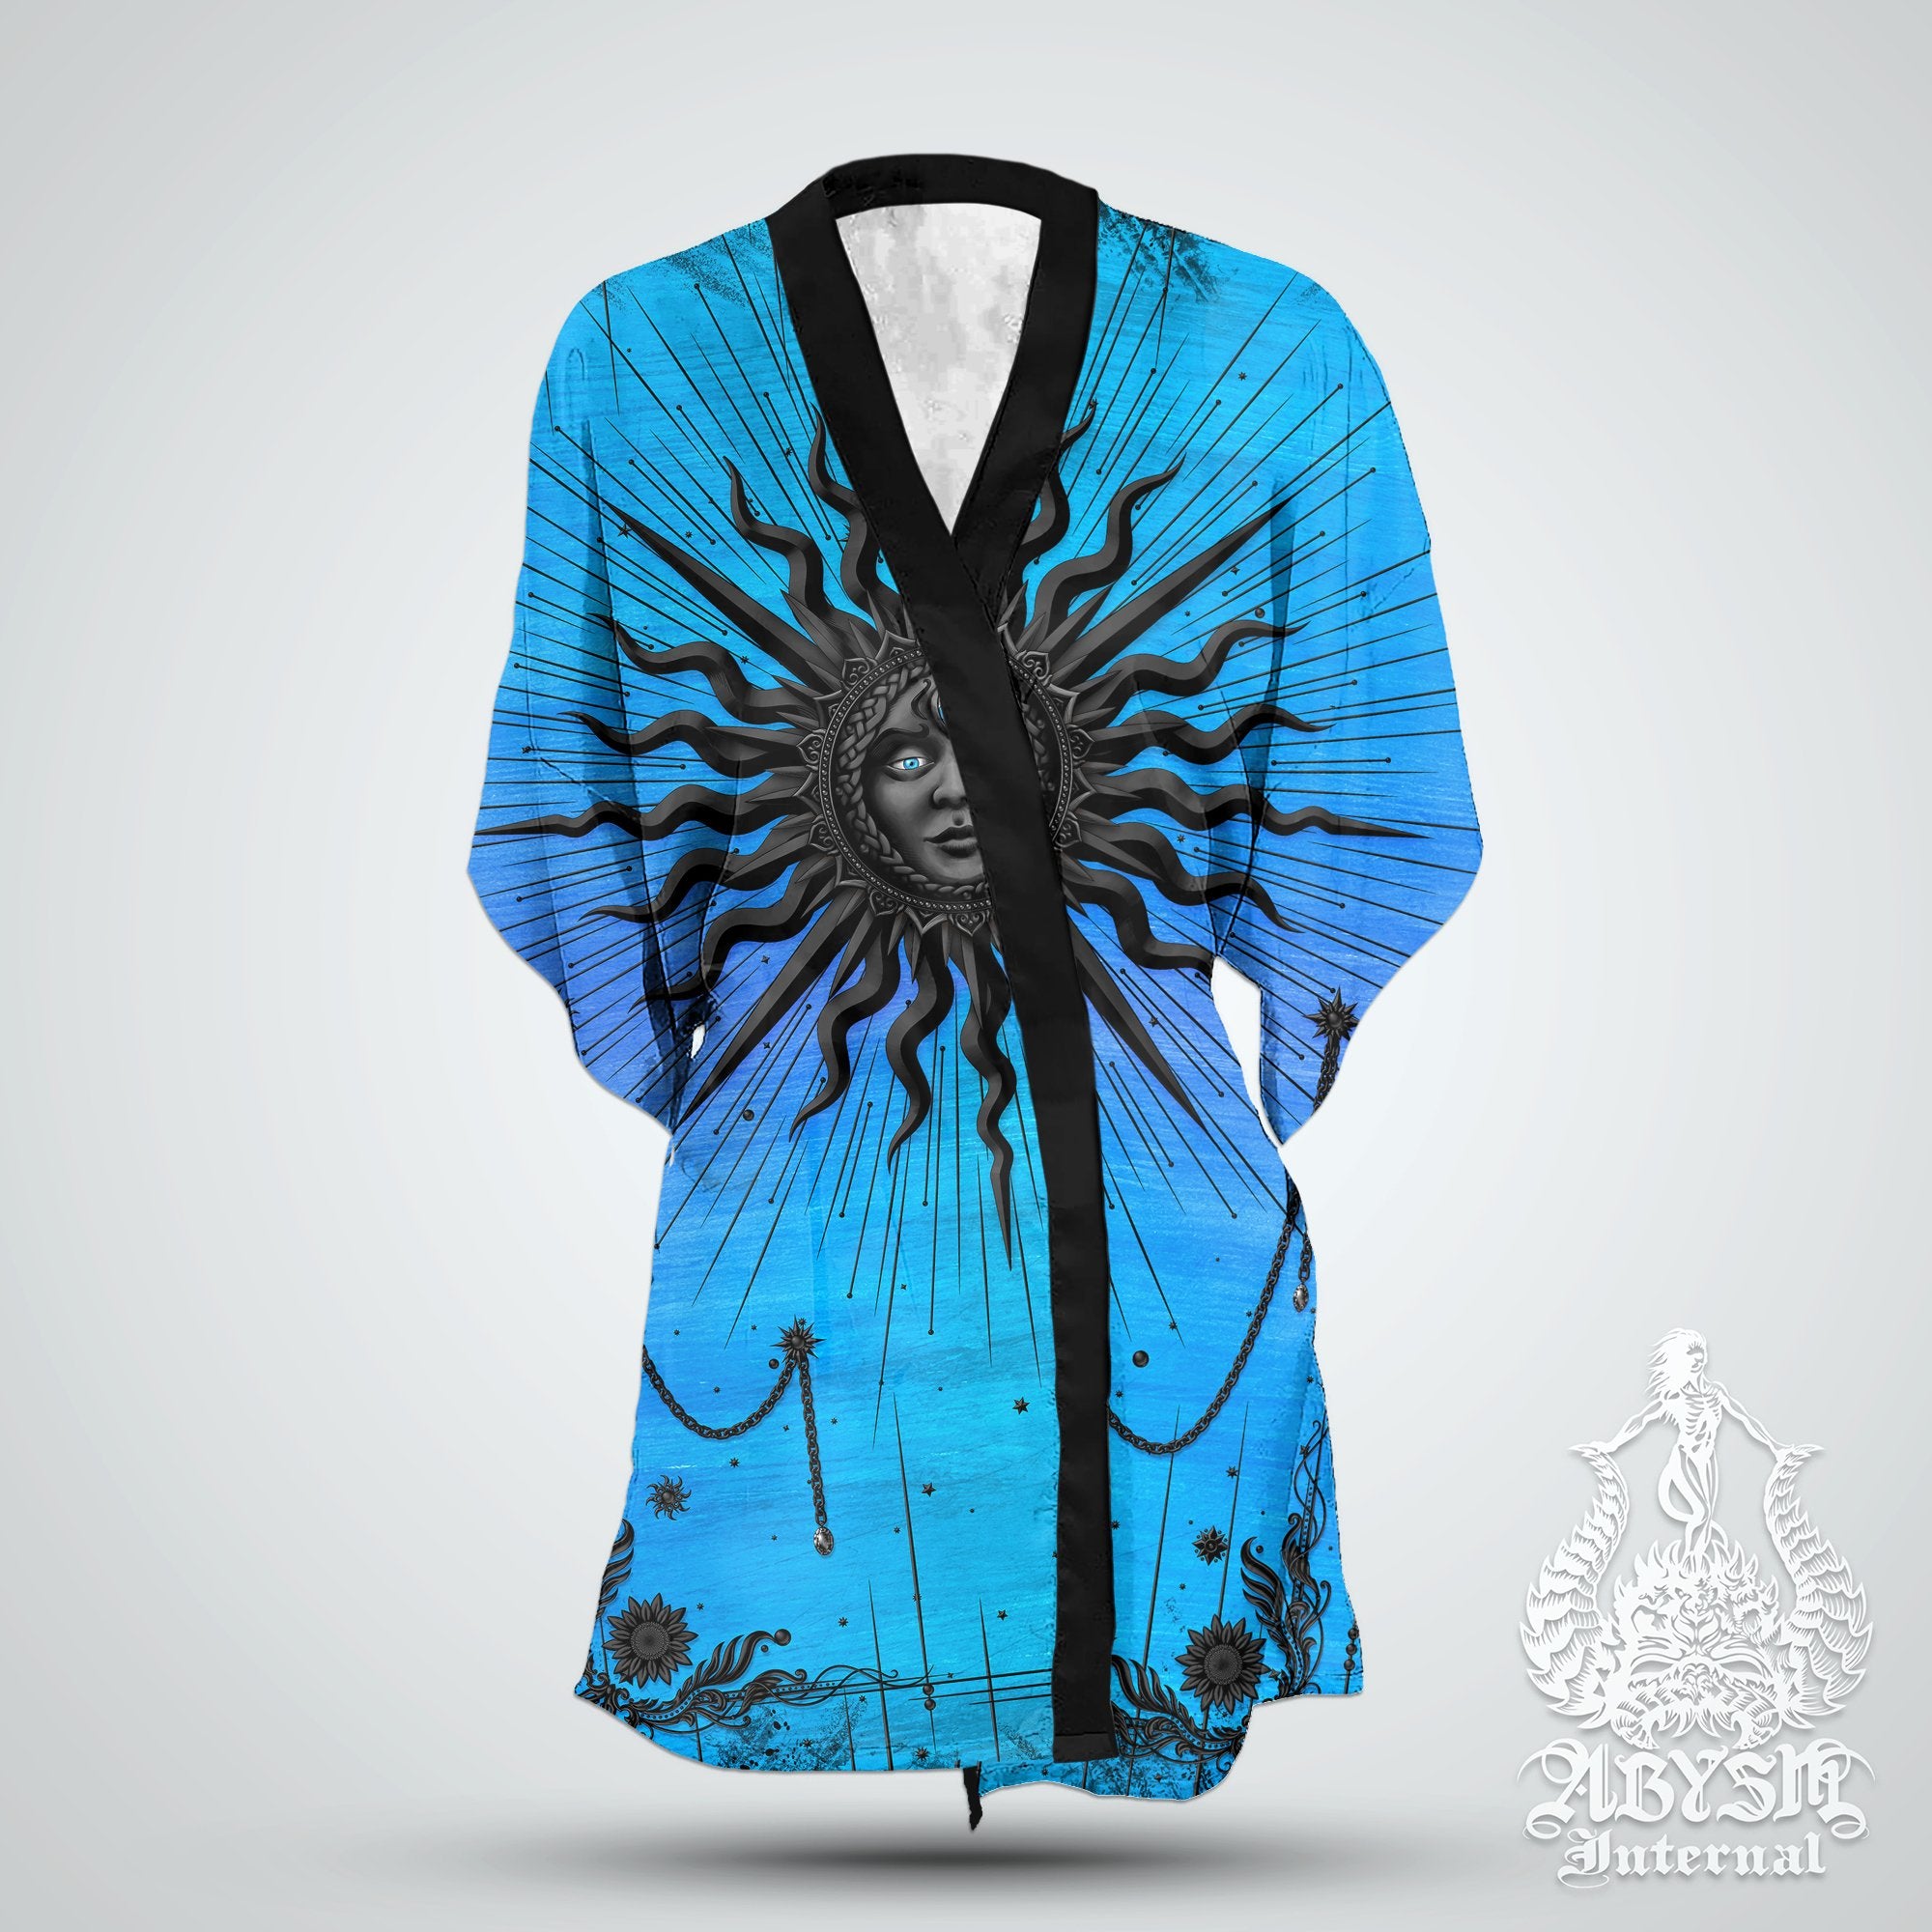 The Sun Short Kimono Robe, Witch Beach Party Outfit, Tarot Arcana Coverup, Pagan Summer Festival, Witchy Clothing, Unisex - Cyan and Black - Abysm Internal